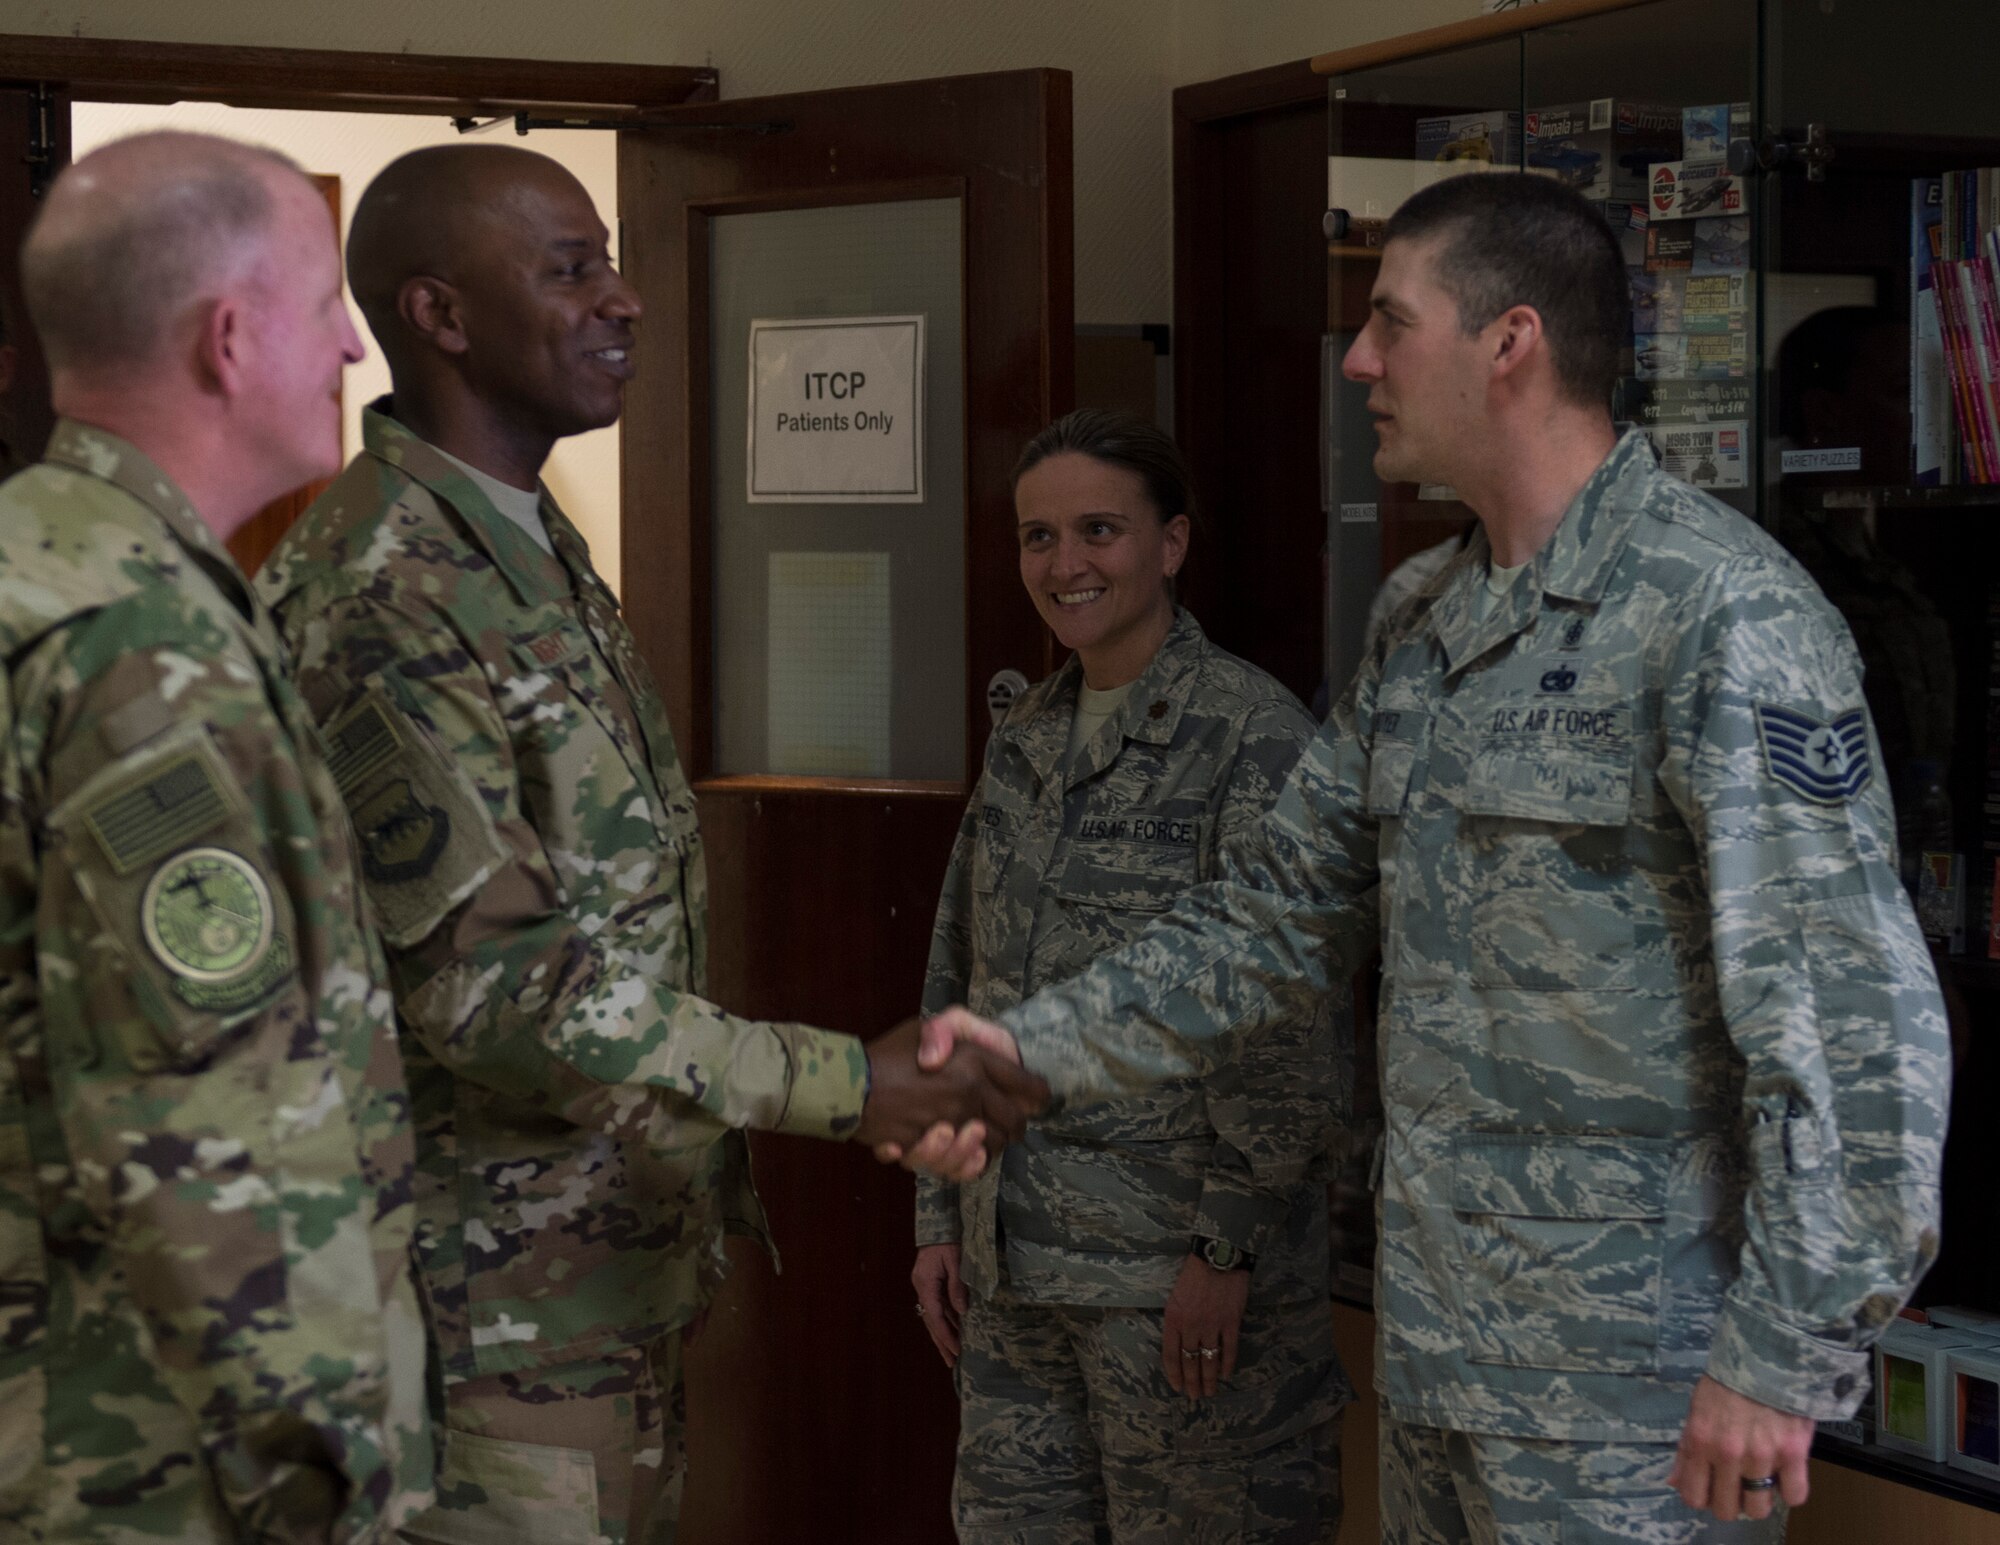 U.S. Air Force Vice Chief of Staff Gen. Stephen W. Wilson and Chief Master Sgt. of the Air Force Kaleth O. Wright visit Airmen with the 379th Expeditionary Medical Group at Al Udeid Air Base, Qatar, April 12, 2017. Throughout their visit, Wilson and Wright made stops to units across the wing, providing an opportunity for the Airmen to speak about their duties and ask questions they had. (U.S. Air Force photo by Tech. Sgt. Amy M. Lovgren)